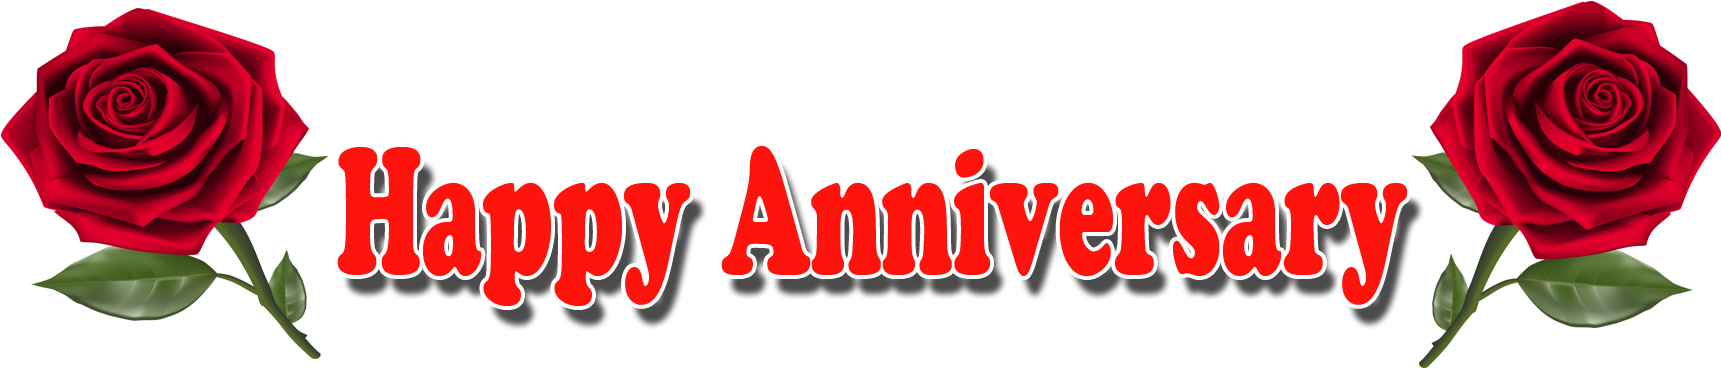 Free Happy Anniversary PNG Images with Transparent Backgrounds